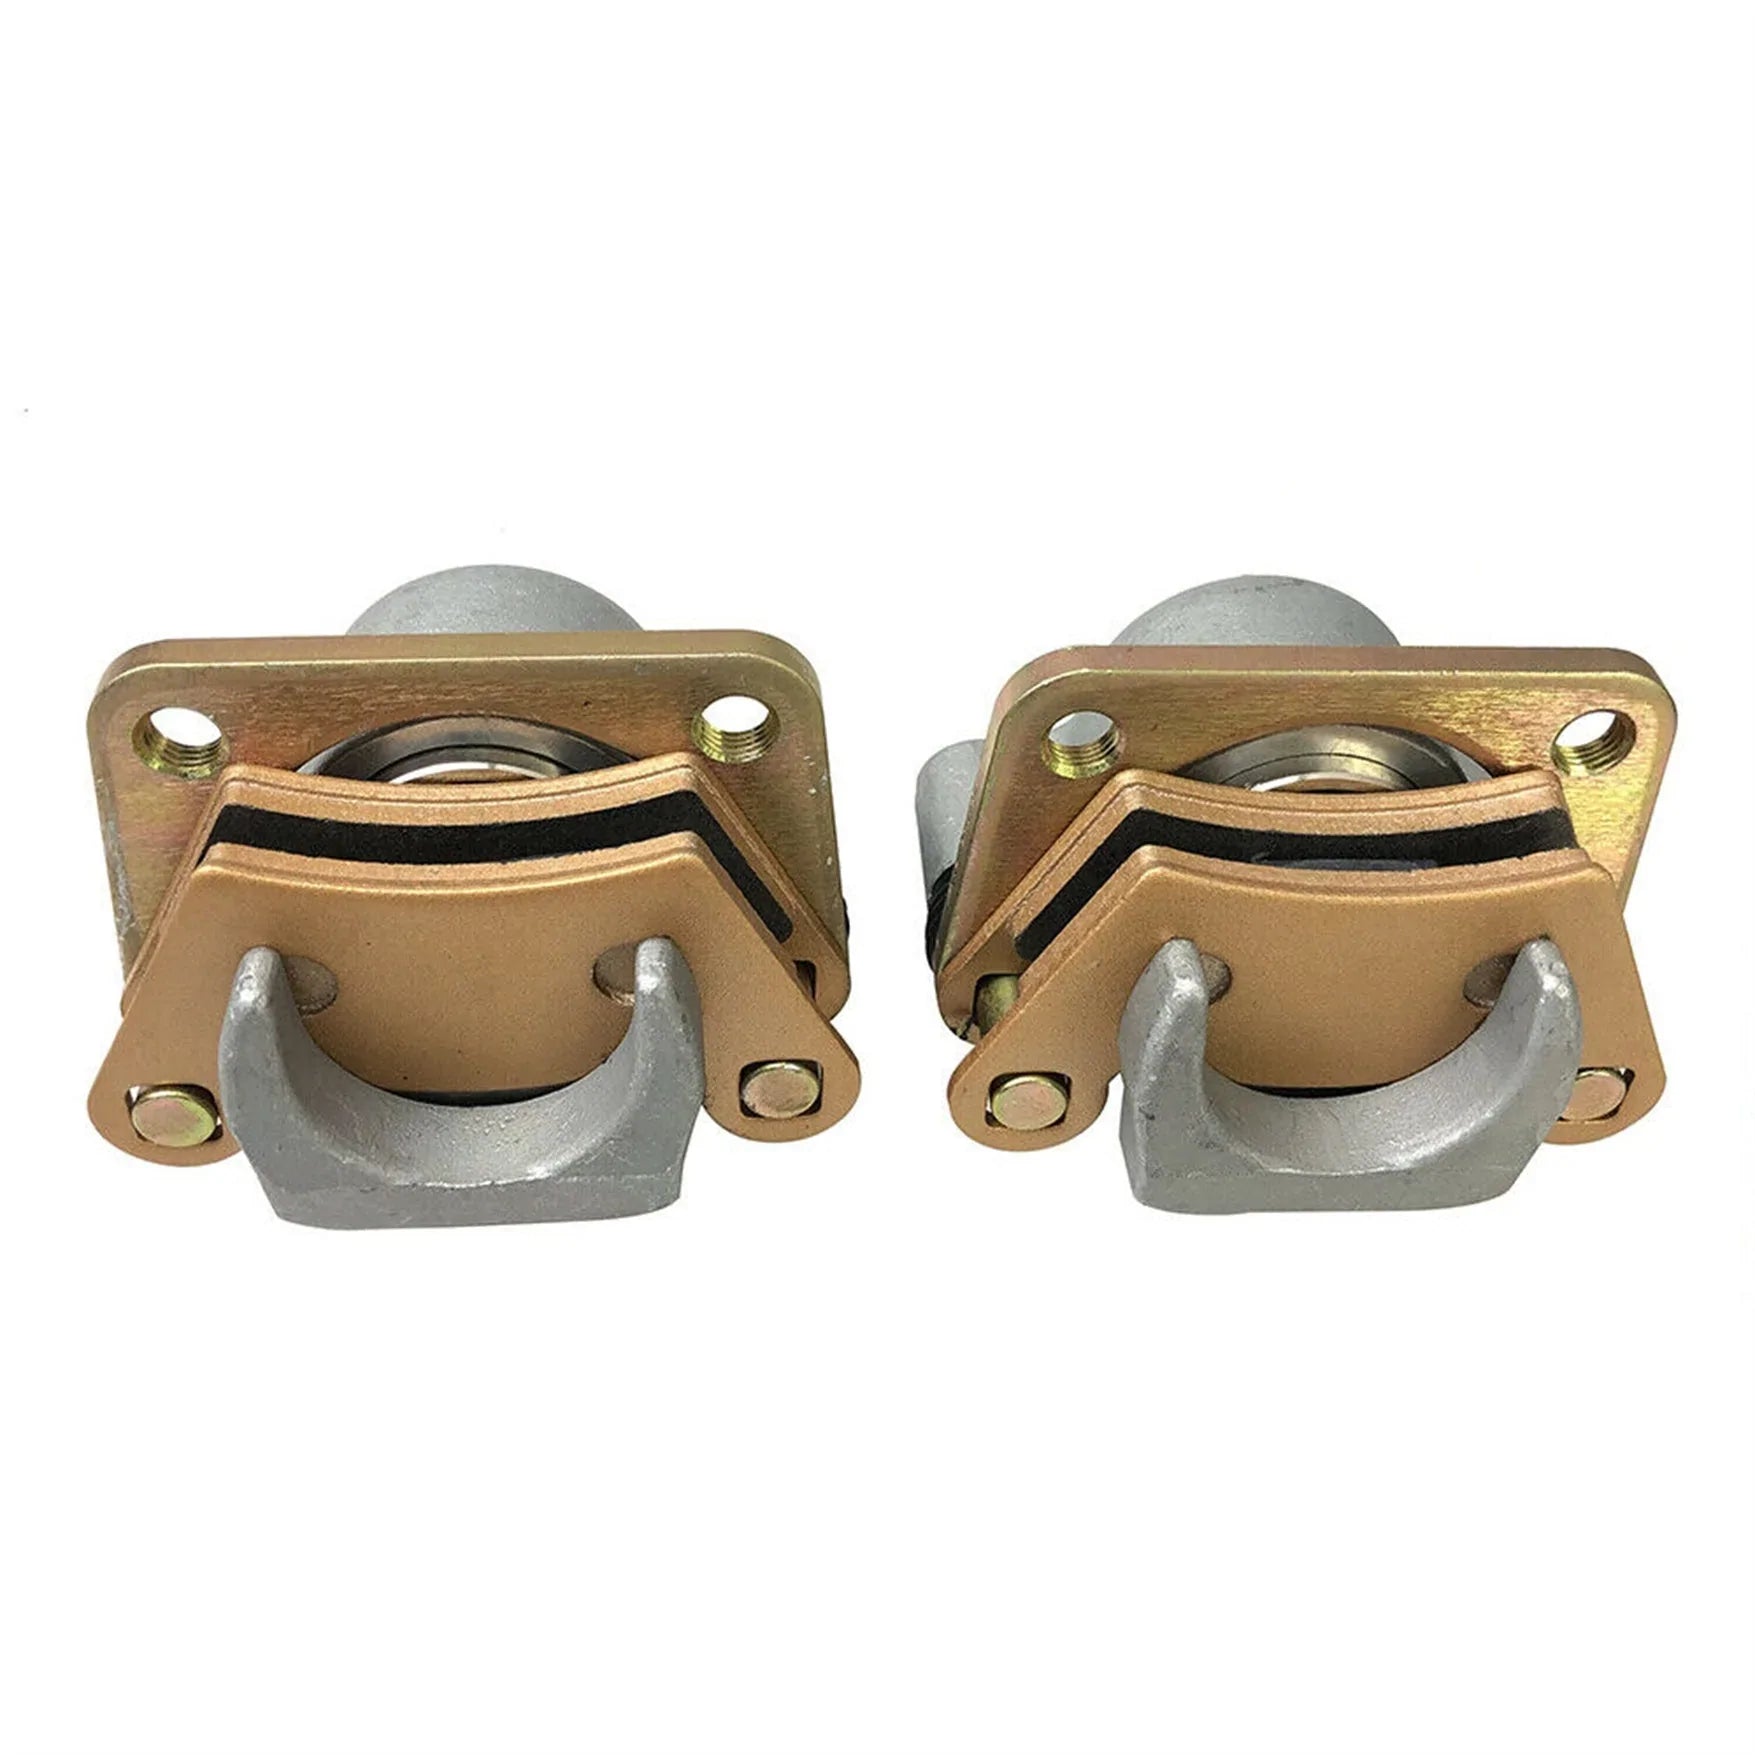 Pair Rear Left and Right Brake Calipers Sets Replacement for Polaris Ranger XP 570 XP 900 XP 1000 EPS 4x4 w/Pads LAB WORK MOTO